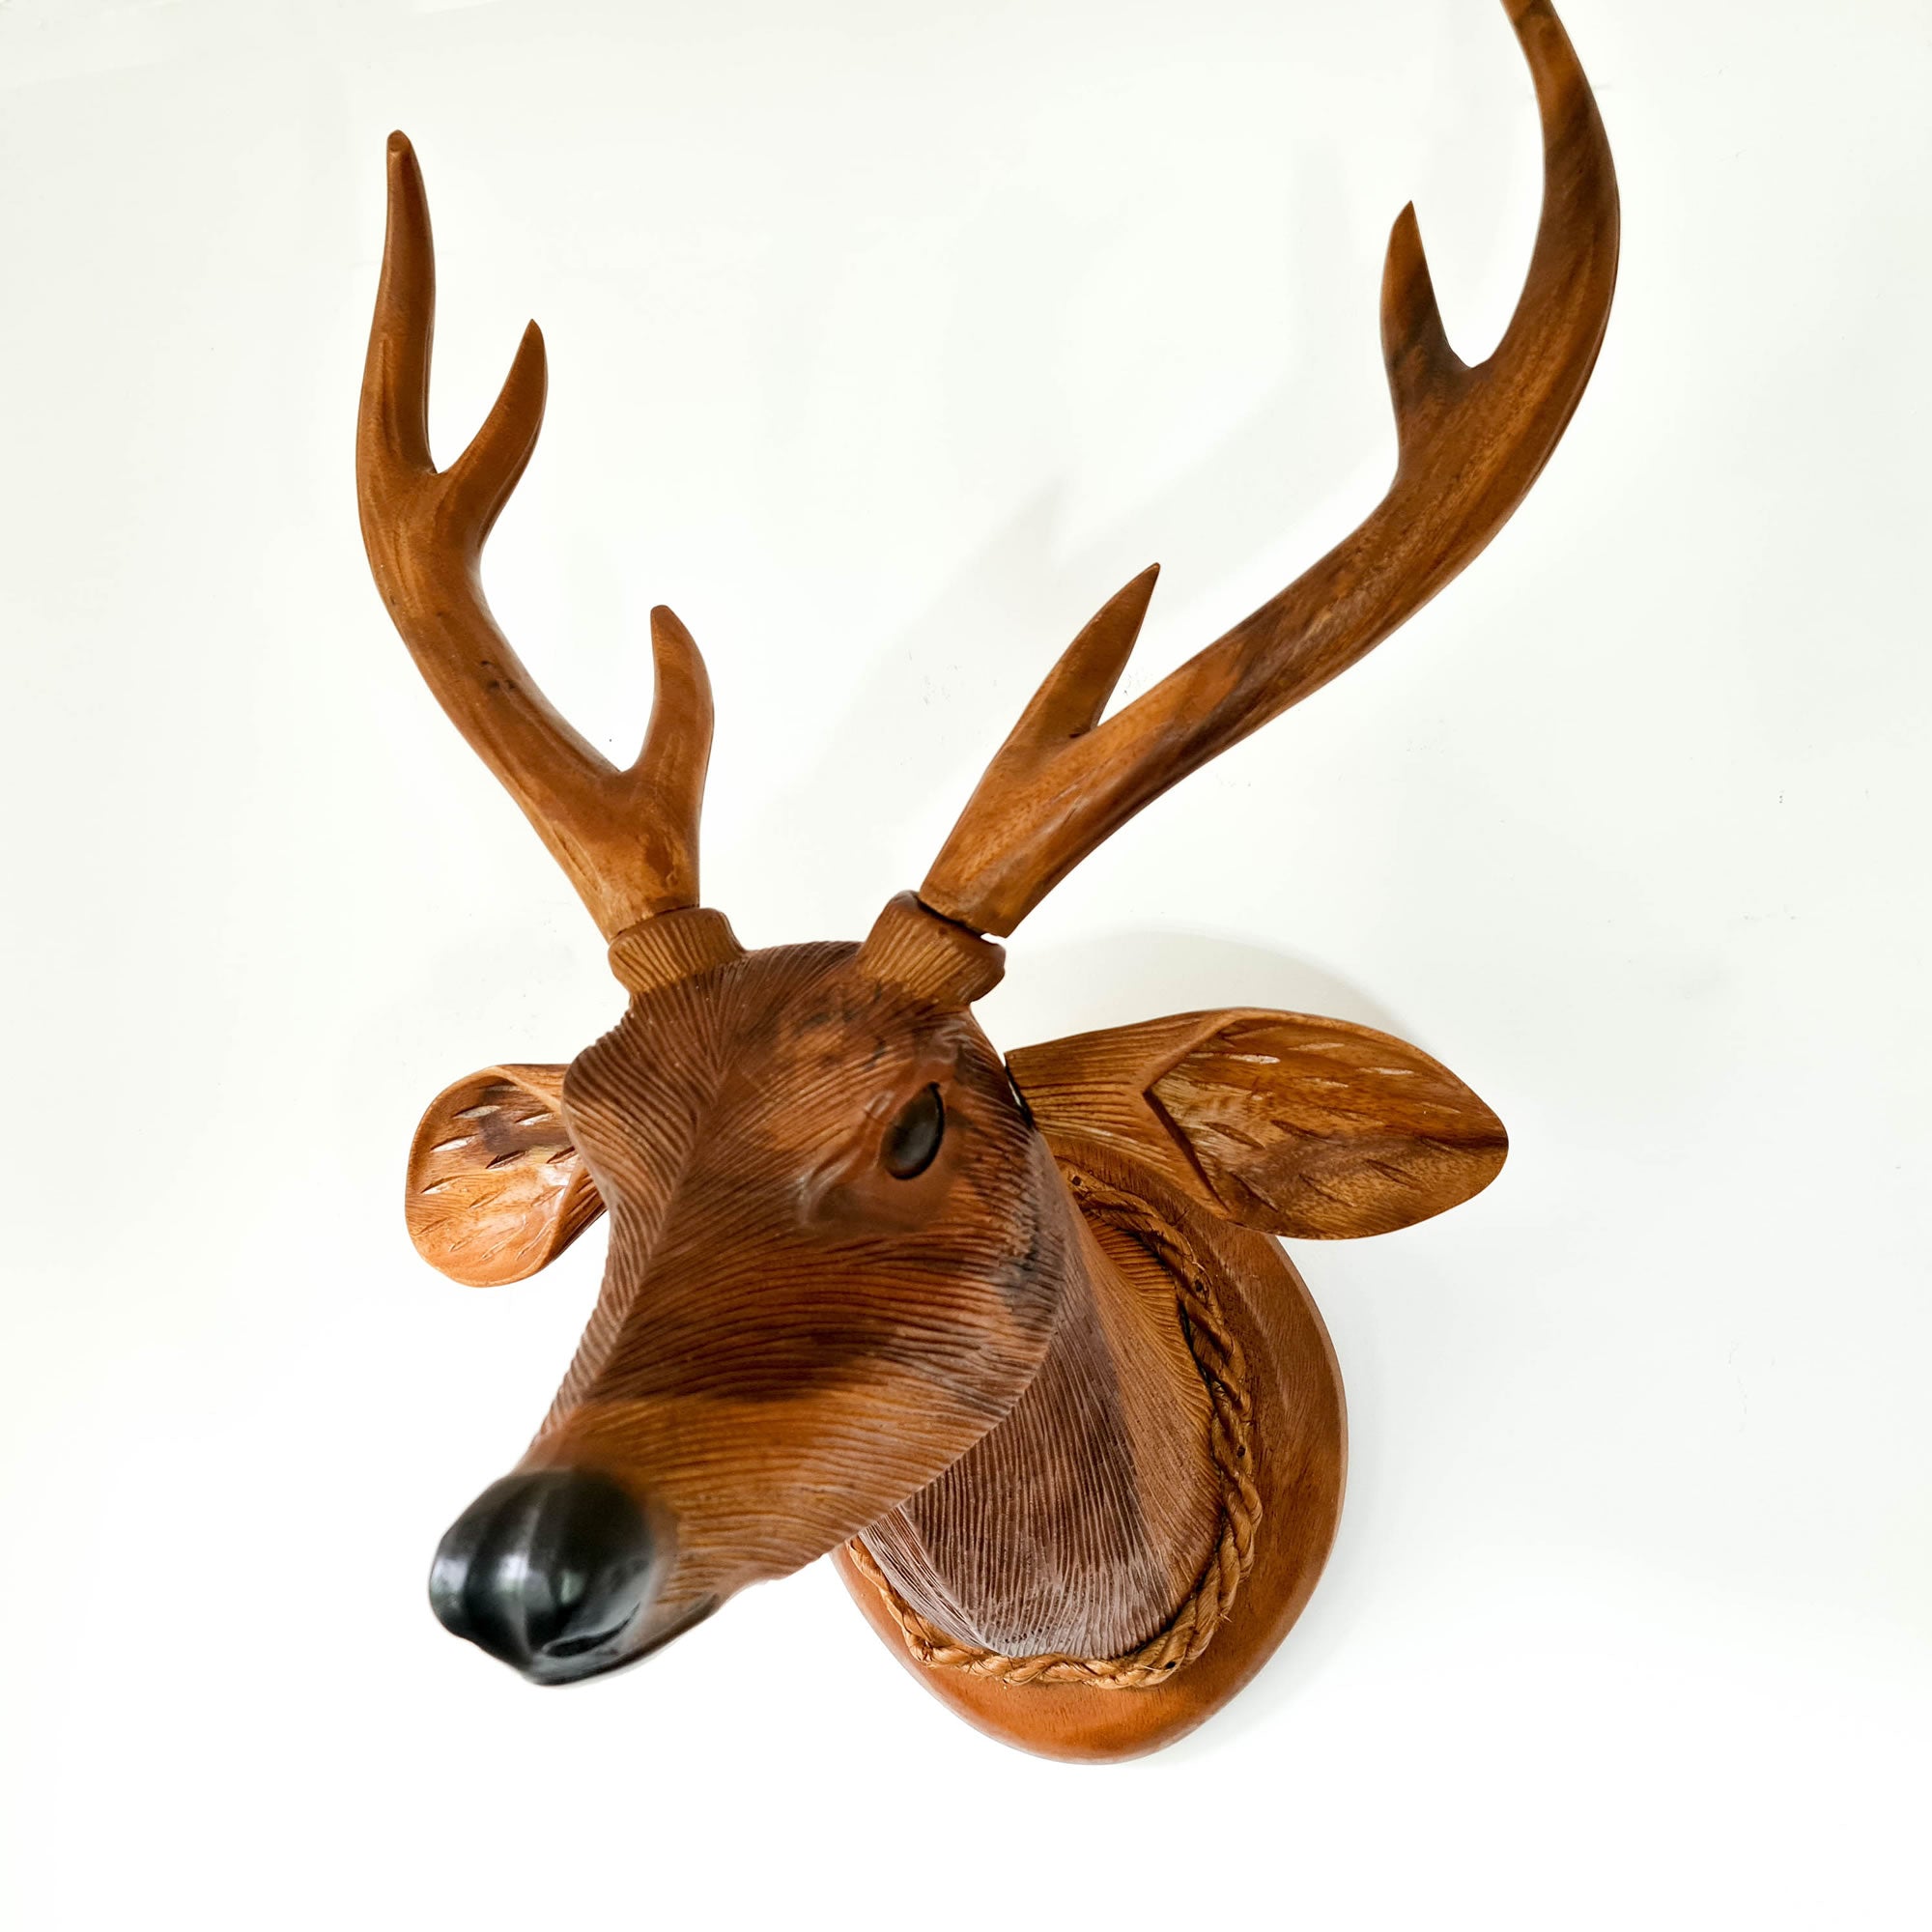 Deer Buck Head - Carved Wooden Decorative Sculpture ArtDeer Buck Head - Carved Wooden Decorative Sculpture ArtHand-carved room decoration wooden wall art sculpture | Unique Buck Deer Stag Head rare antique style hangings and gifts | Bohemian boho carved headboards